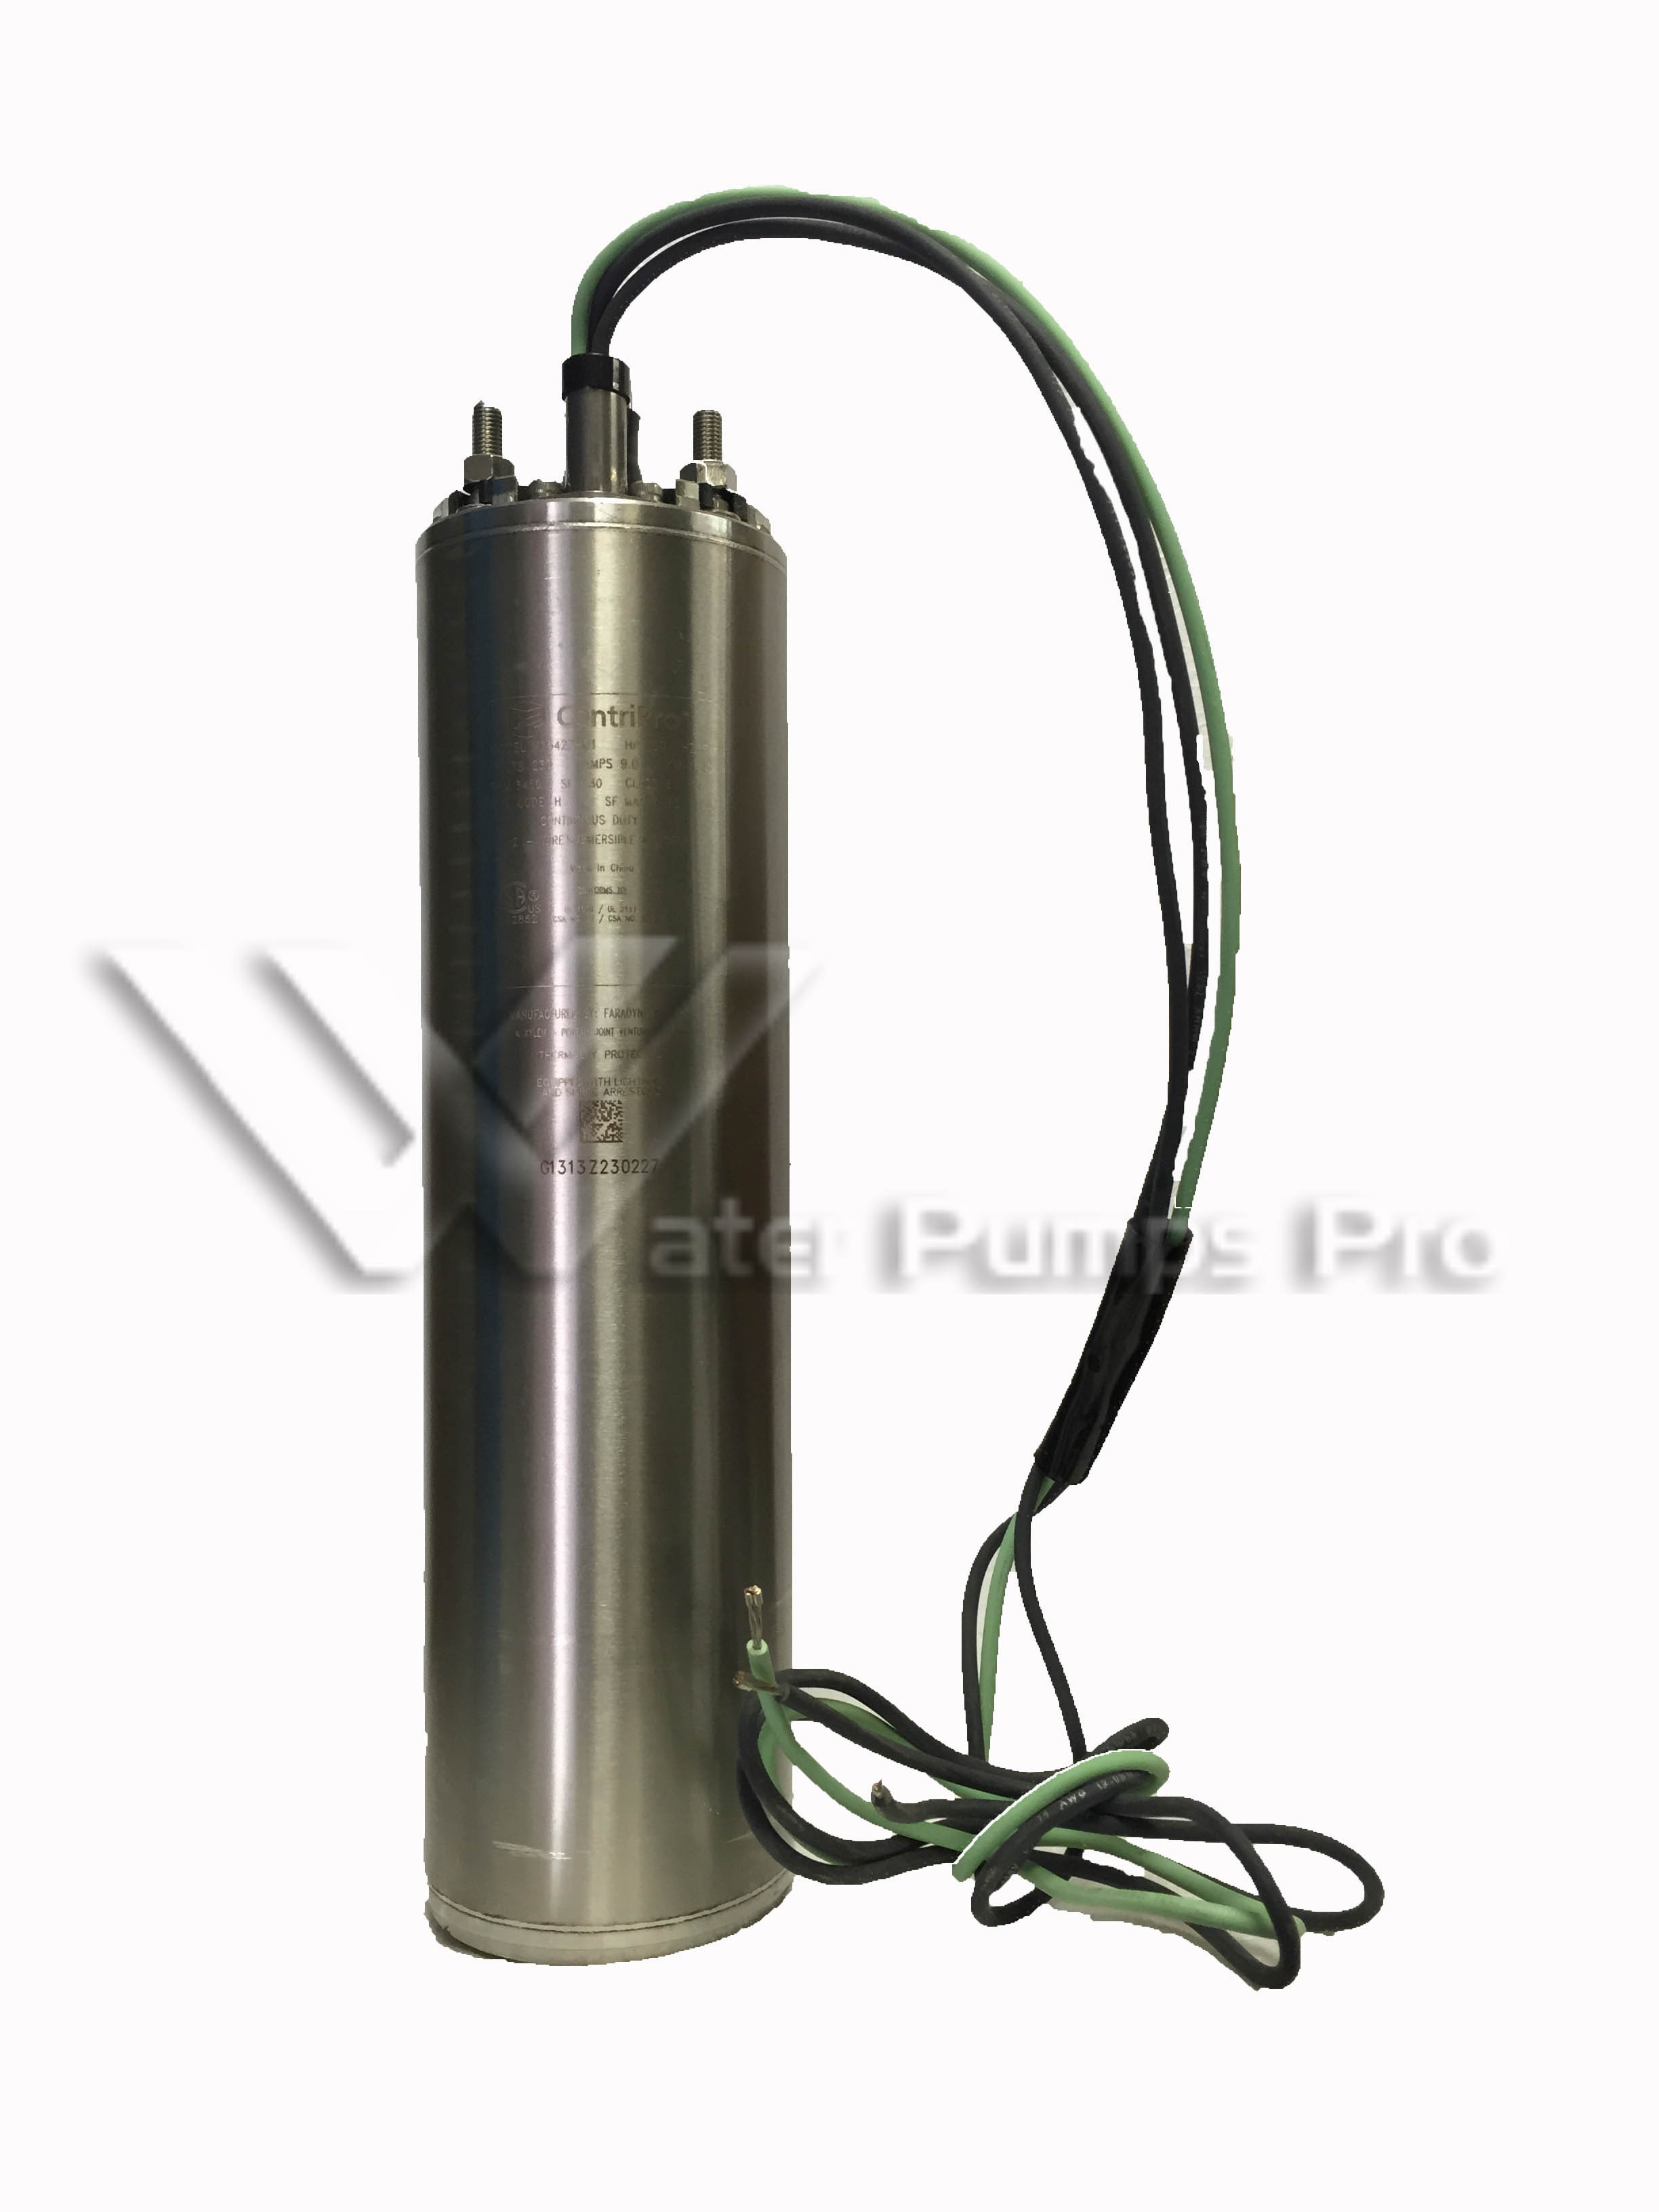 Goulds M05422 1/2HP 4" Submersible Motor 230V 1Phase 2 Wire 60Hz - Click Image to Close